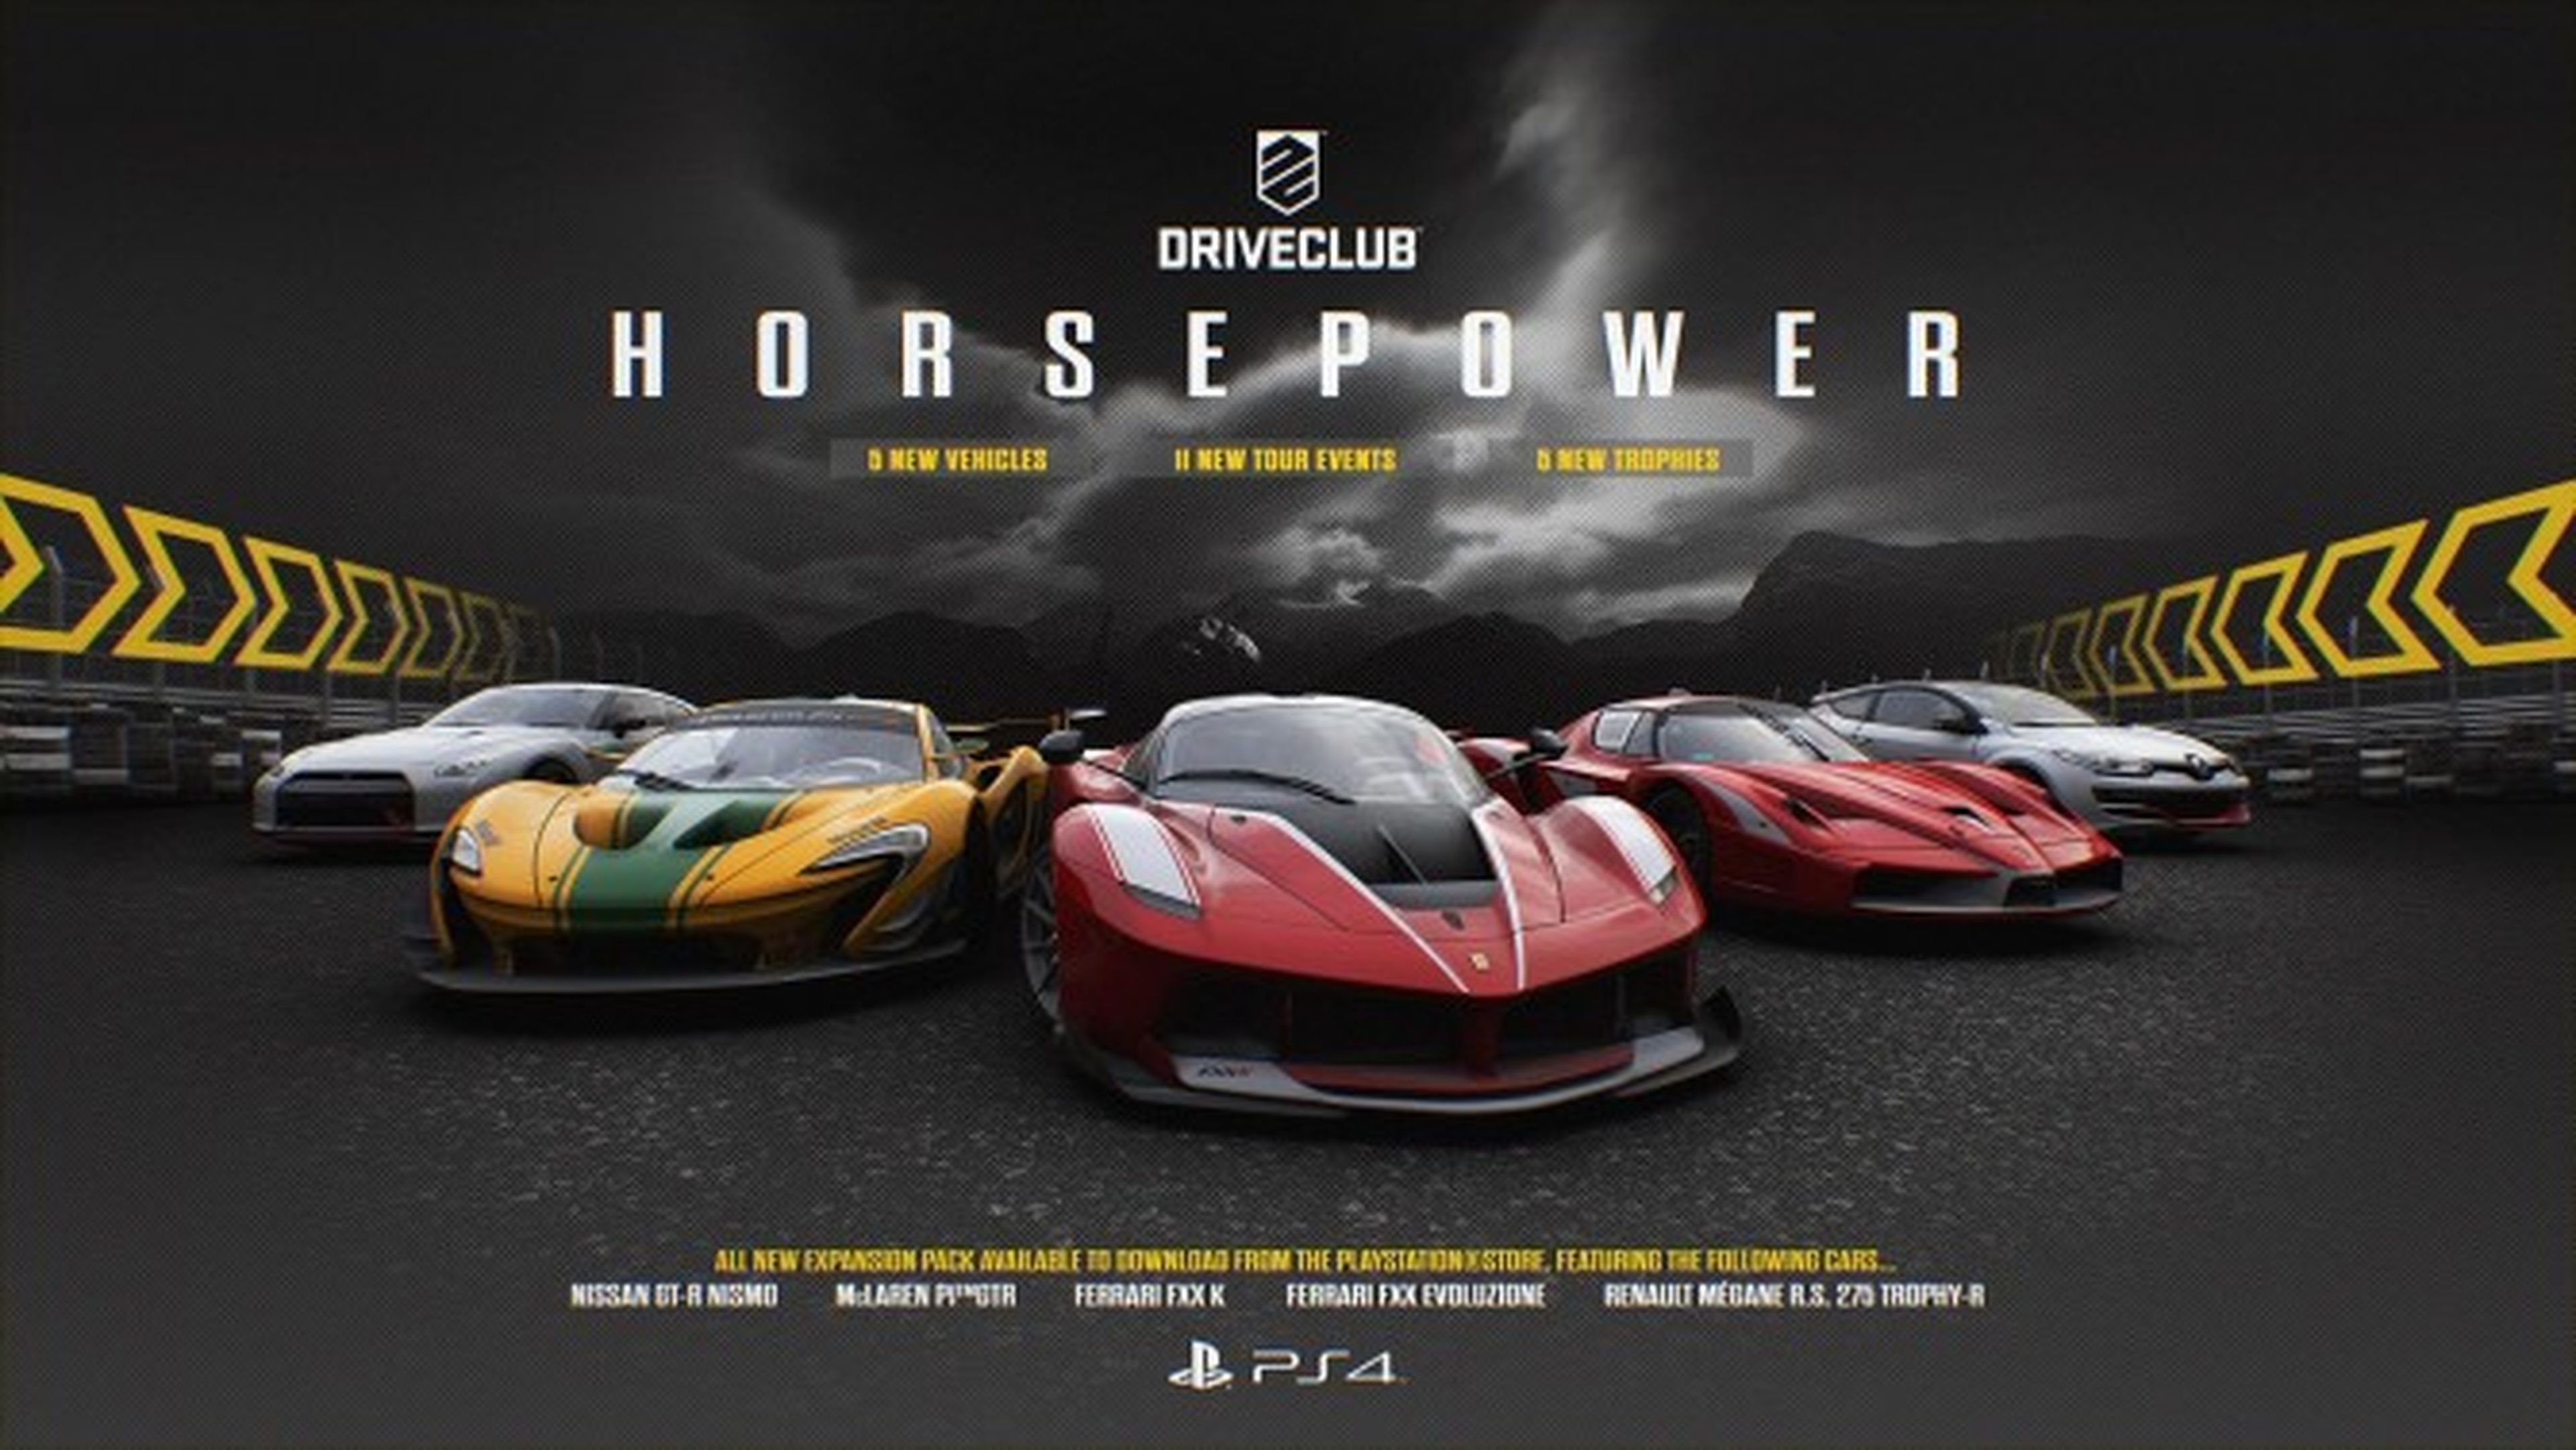 Coming on July 28_ DRIVECLUB HORSEPOWER Expansion Pack